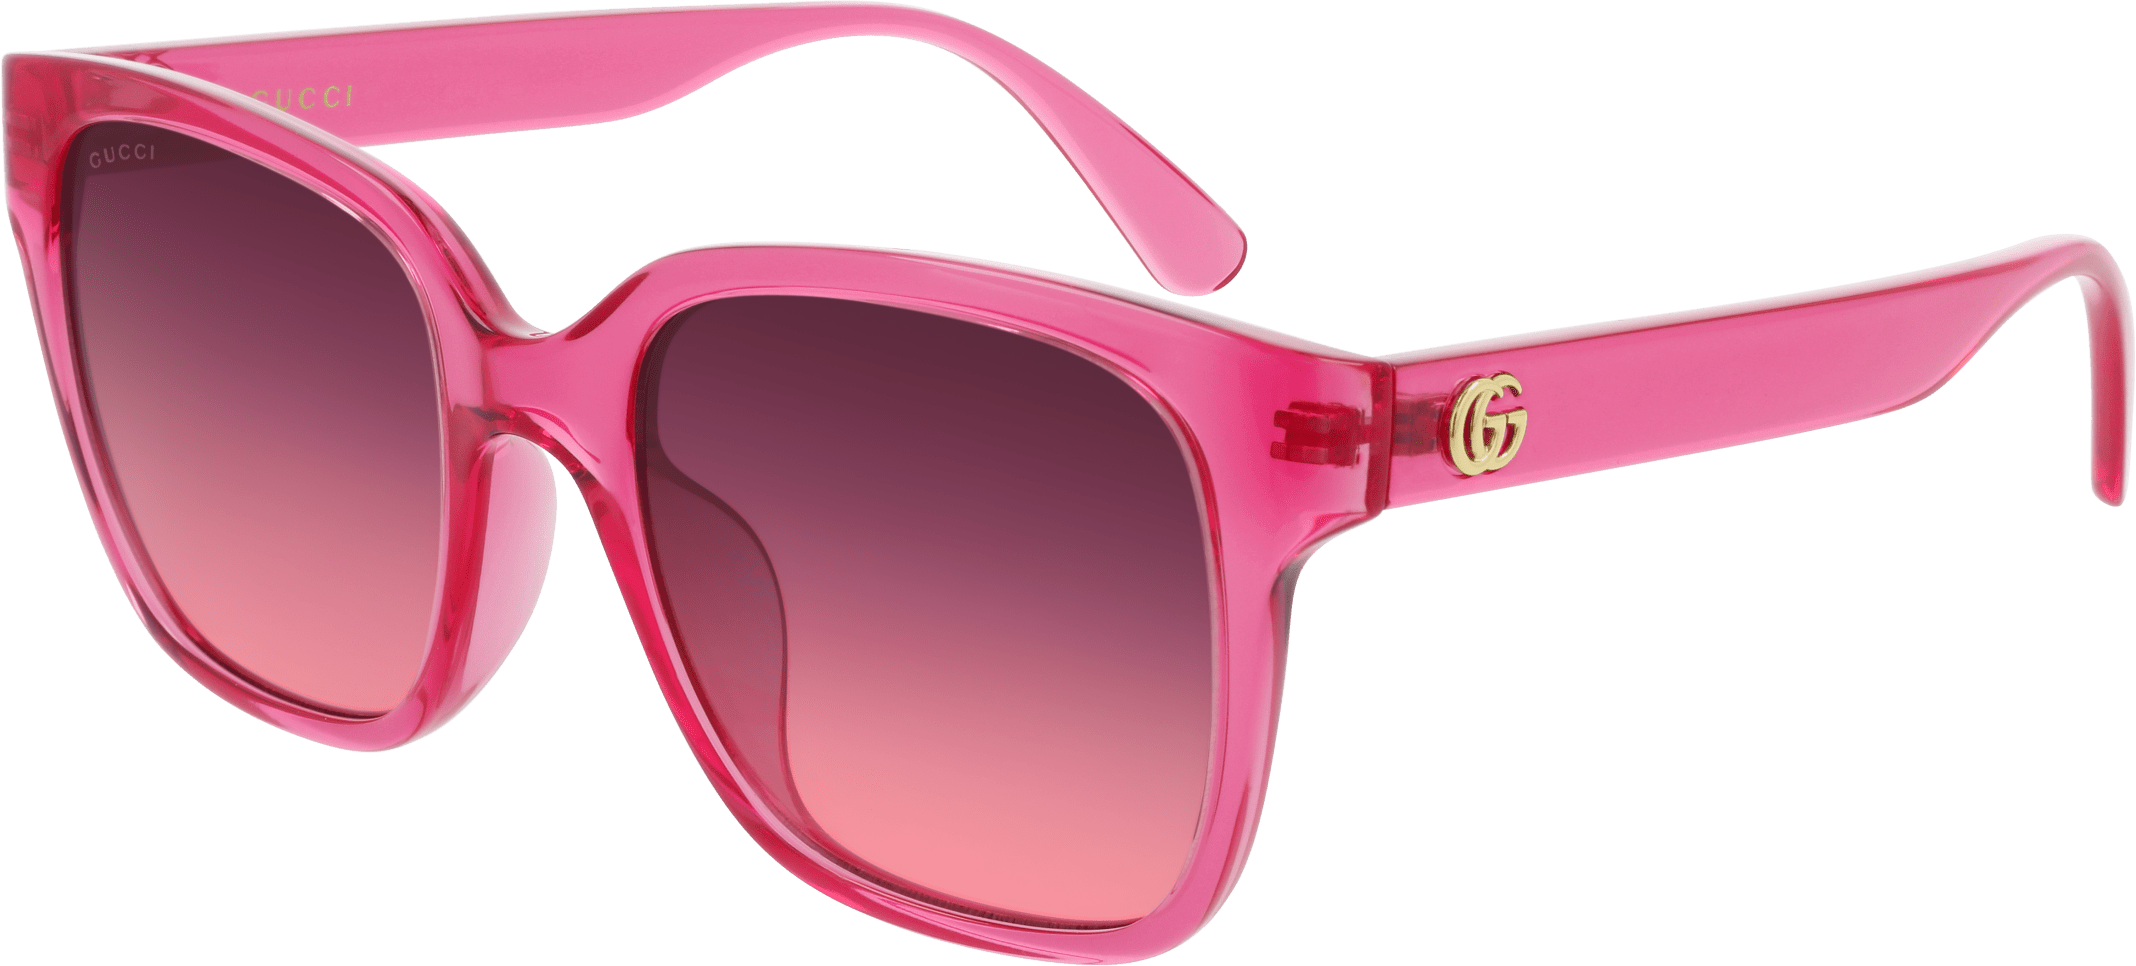 Color_GG0715SA-004 - PINK - RED - GRADIENT(DOUBLE)